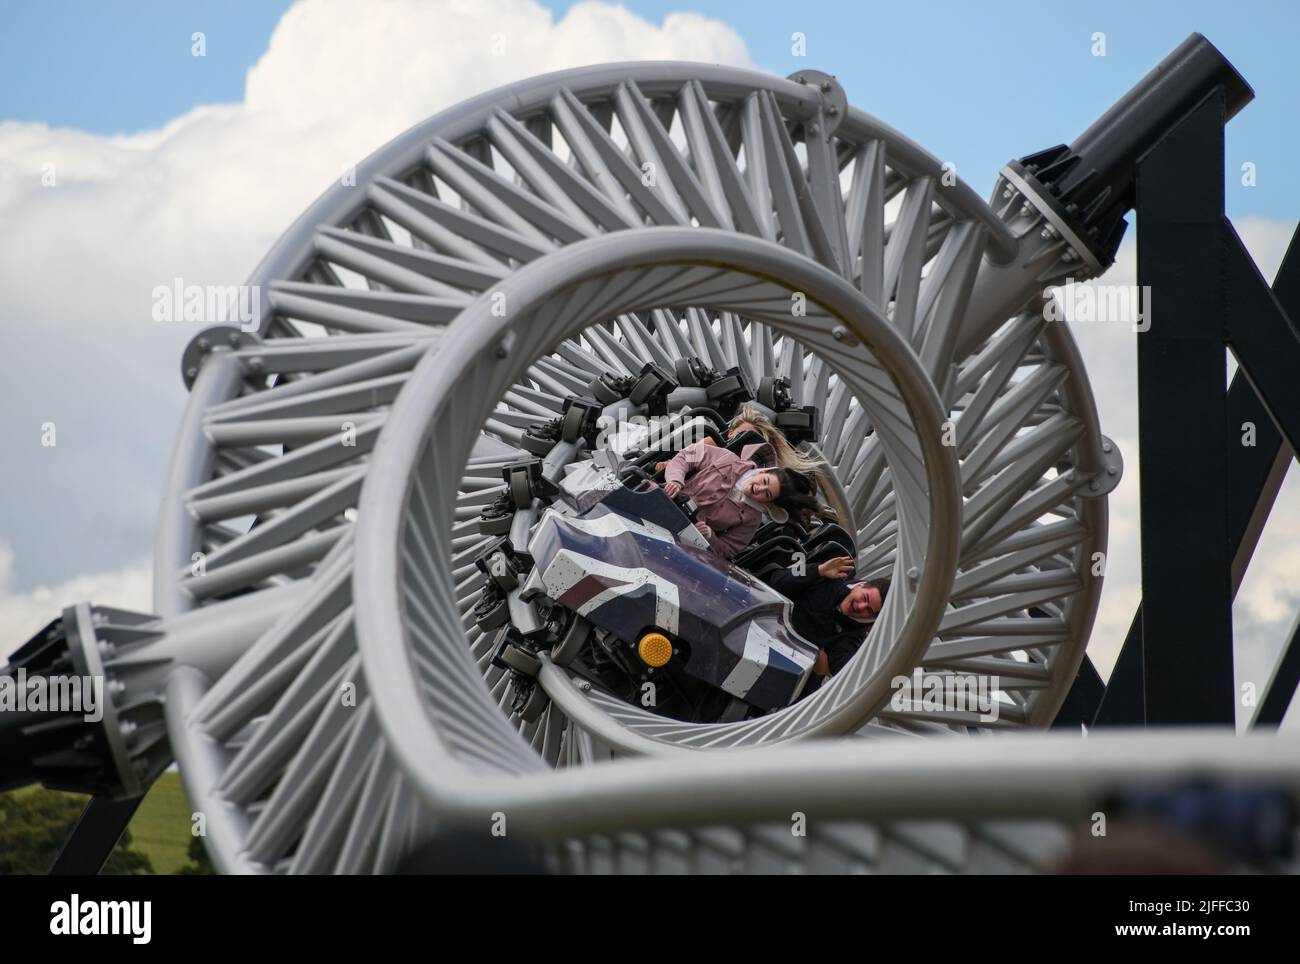 Thrill seekers try the new 10 looping ride 'Sik' at Flamingoland in Yorkshire. Credit: Thomas Faull/Alamy Live News Stock Photo